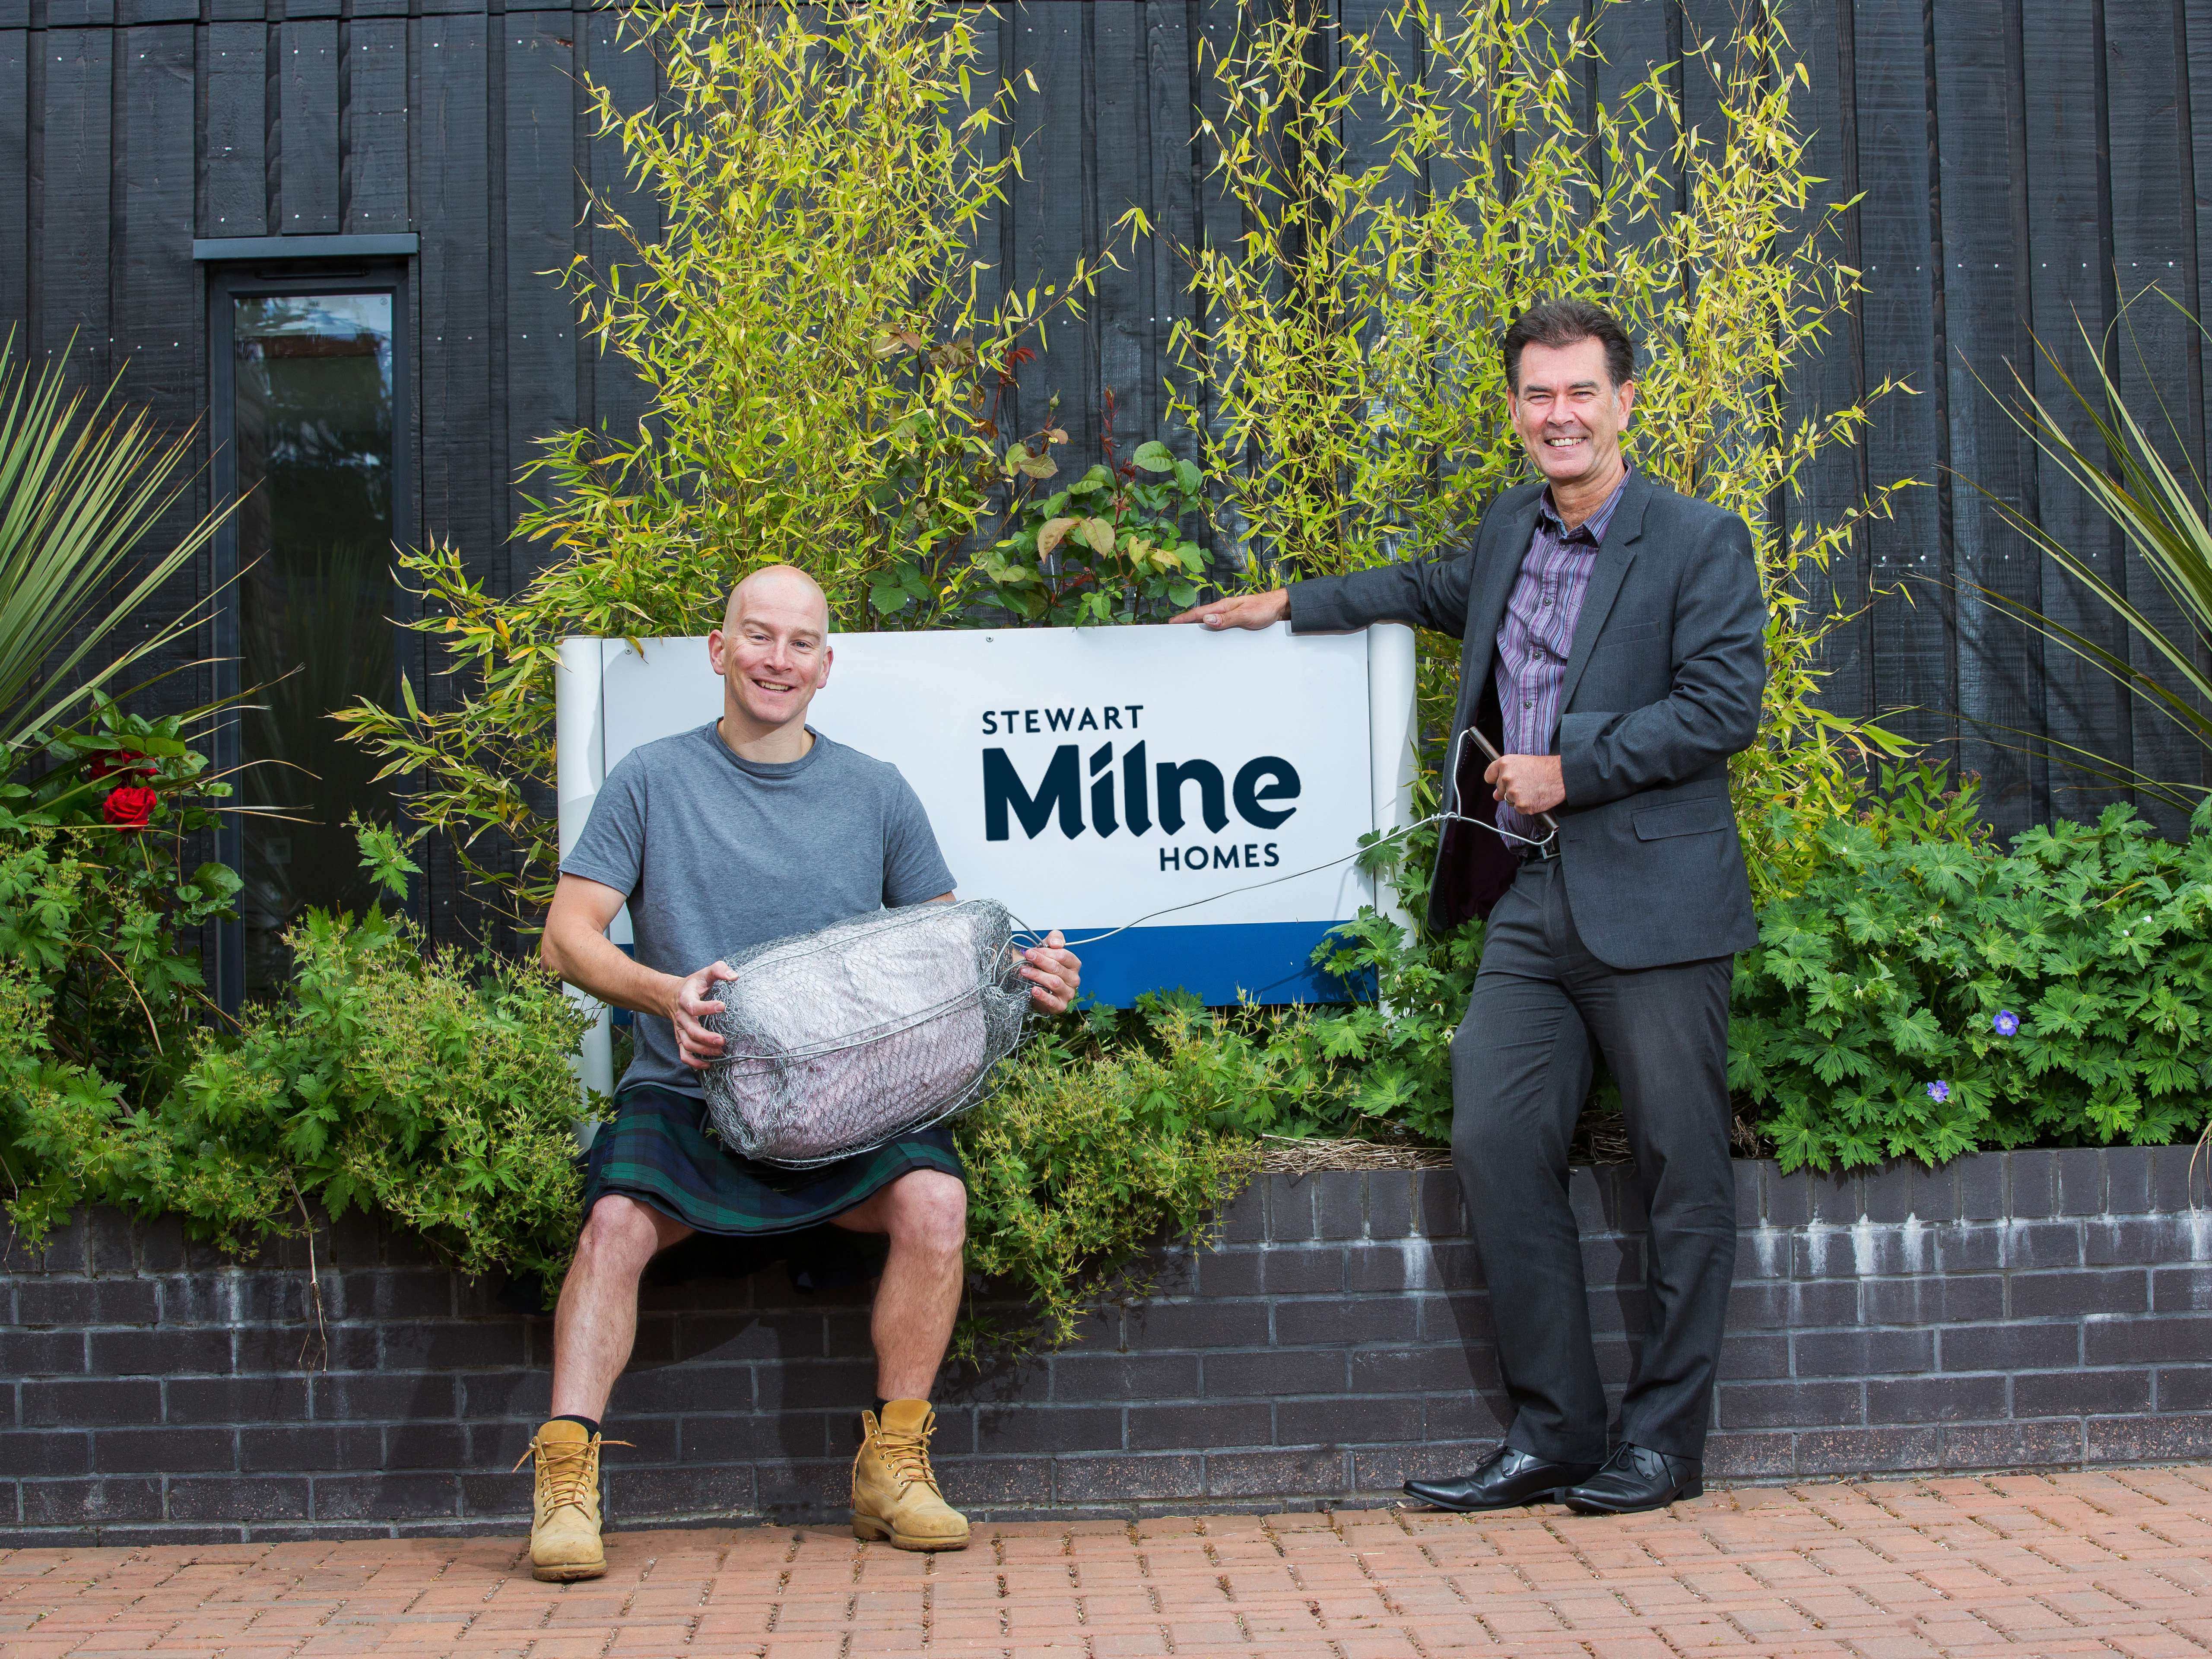 Local communities benefit from £100,000 of Stewart Milne Group support